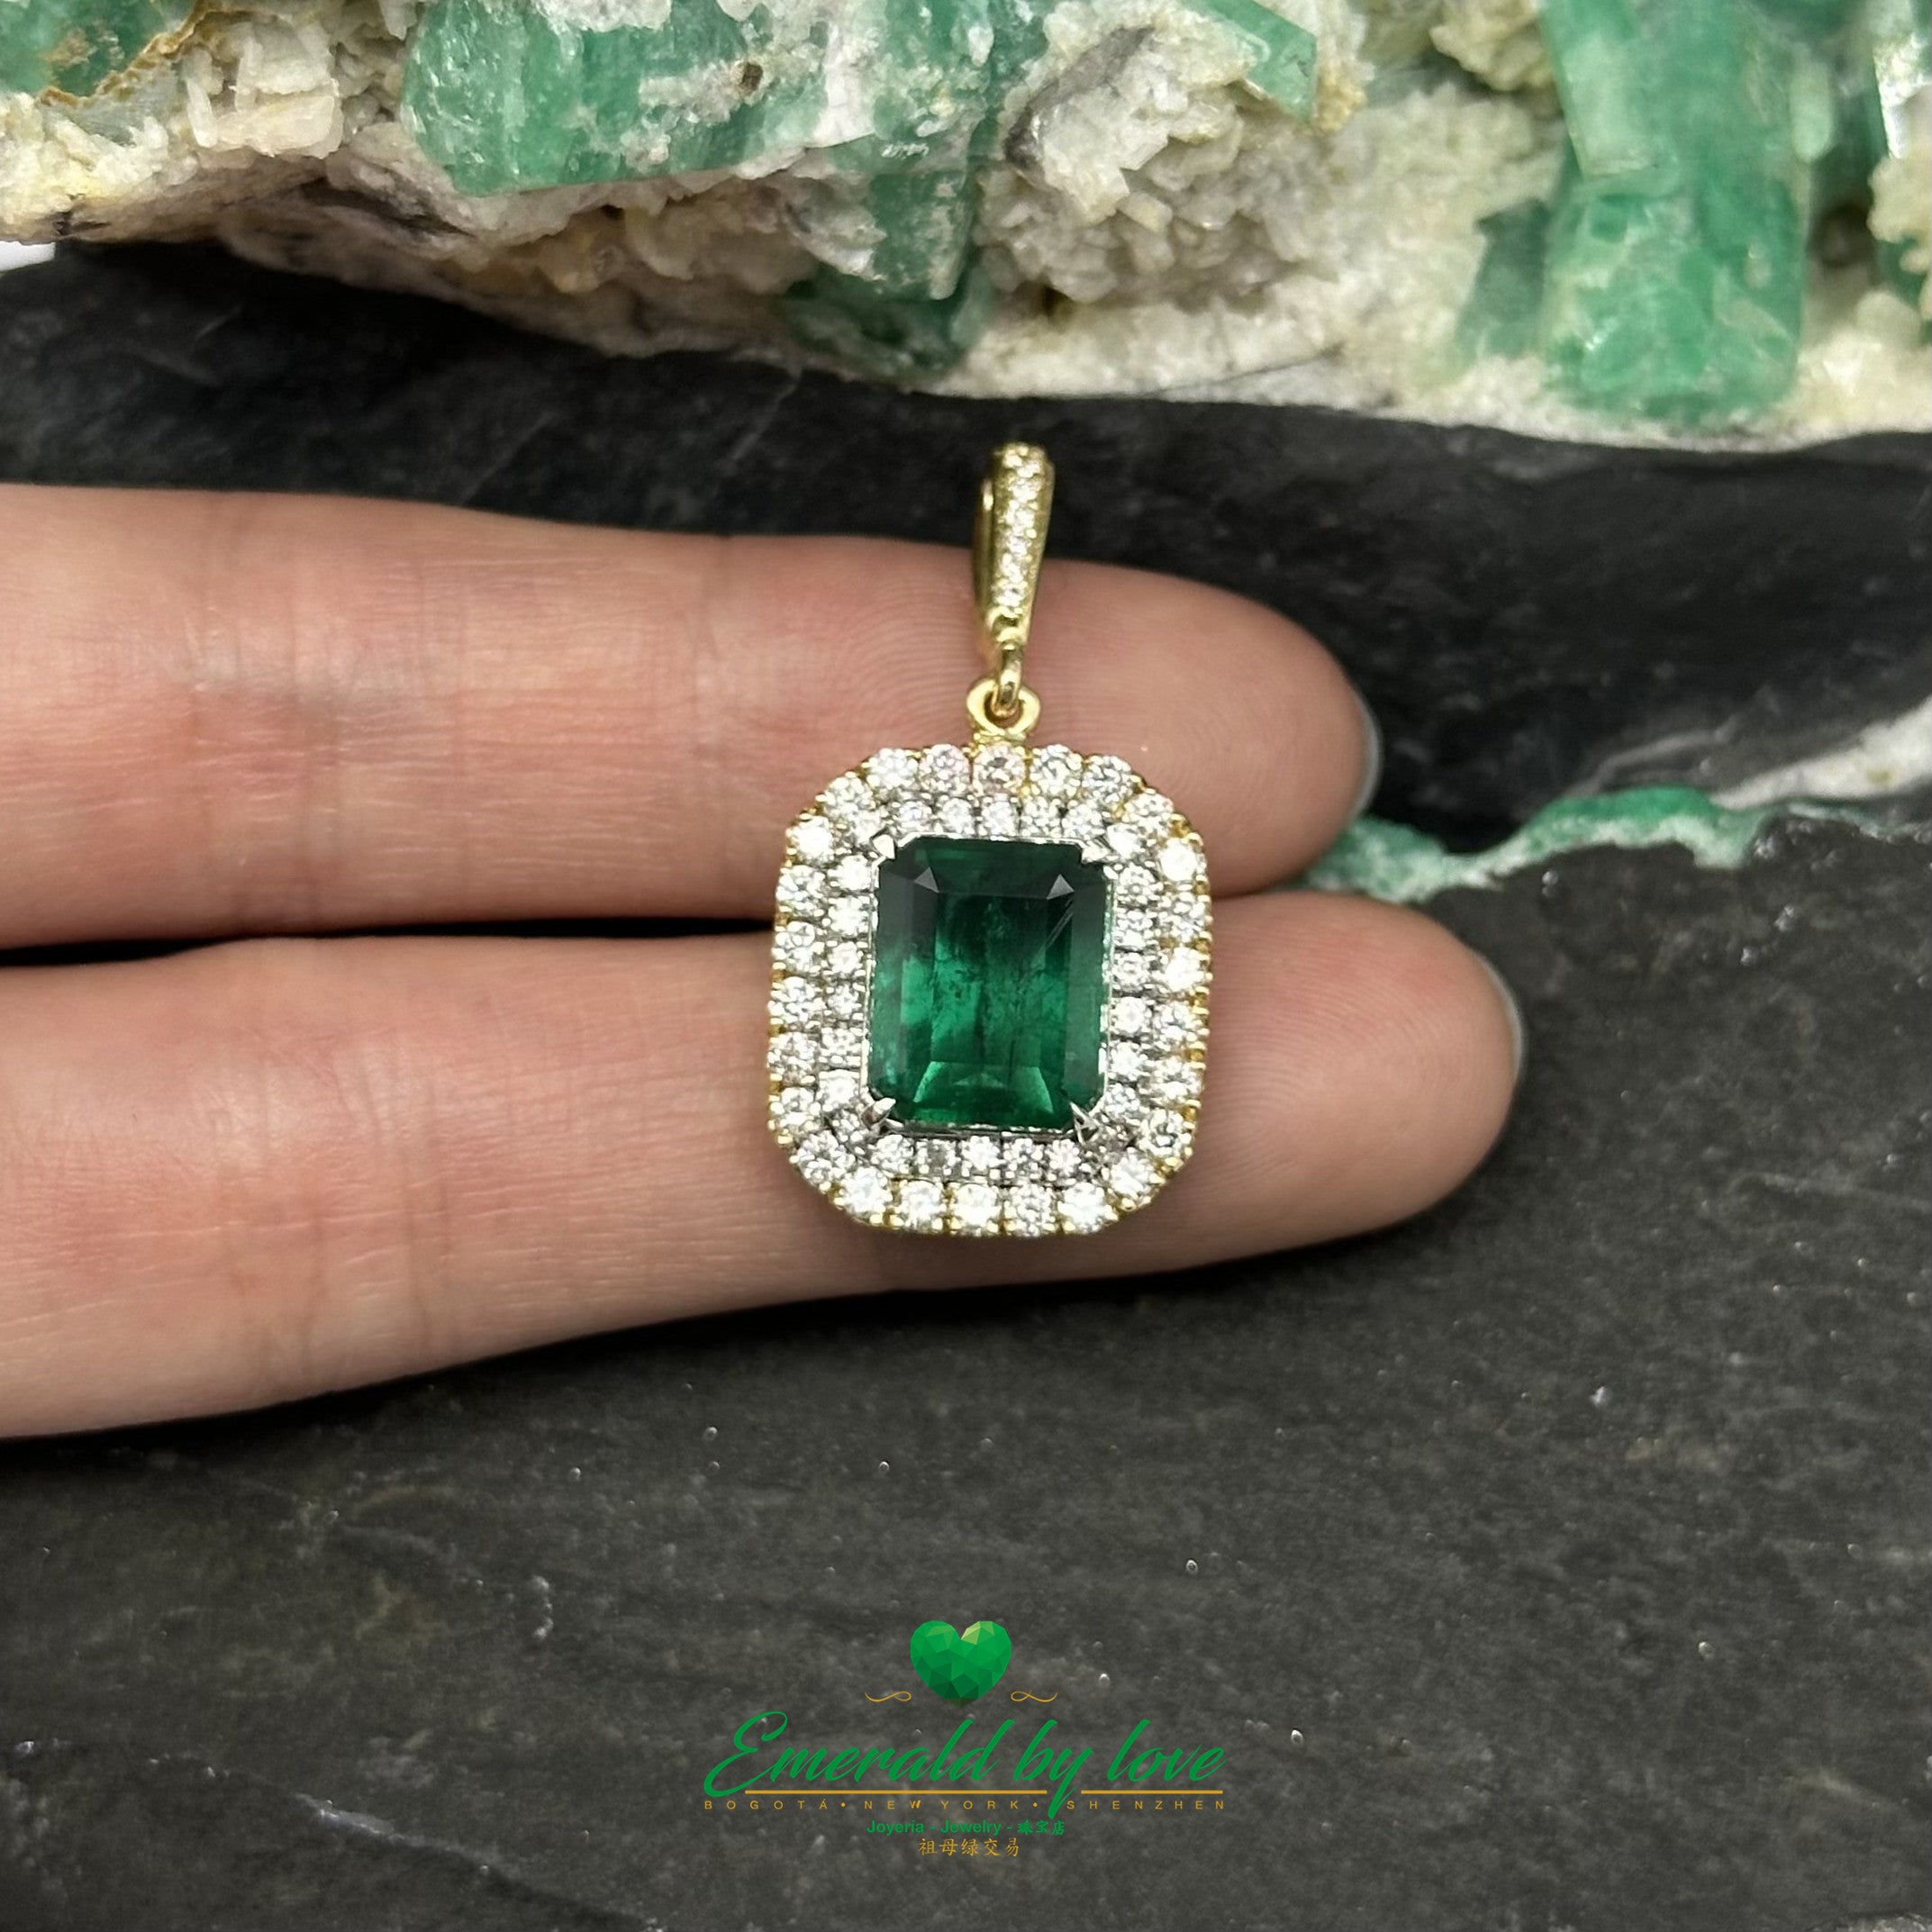 Exquisite Yellow Gold Marquise Pendant with Emerald Cut Emerald and Diamond Halo